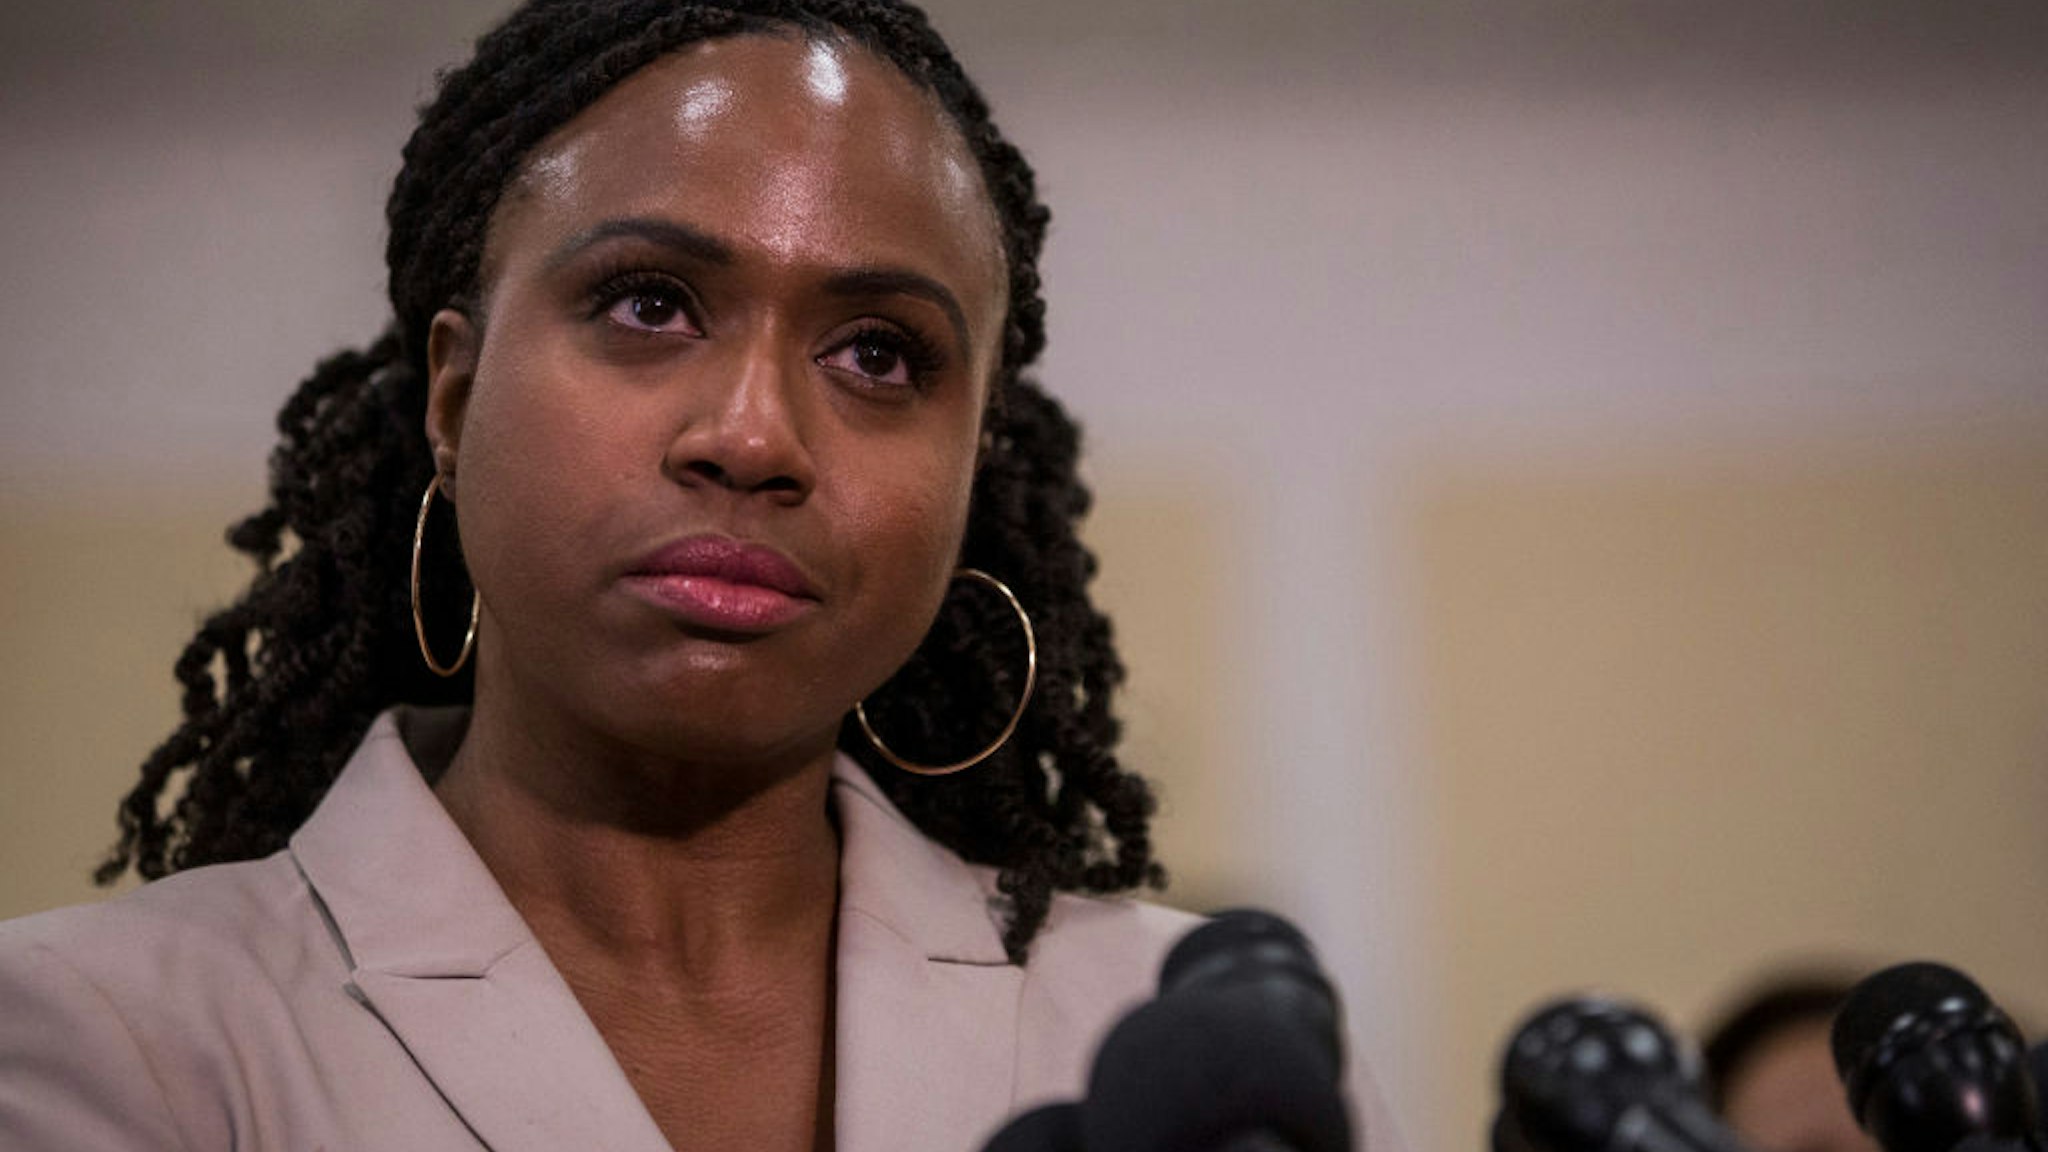 WASHINGTON, DC - JULY 10: Rep. Ayanna Pressley (D-MA) speaks during a press conference preceding a House Oversight and Reform subcommittee hearing on Capitol Hill on July 10, 2019 in Washington, DC. The subject of the hearing was civil rights and civil liberties and migrant detention centers' treatment of children.